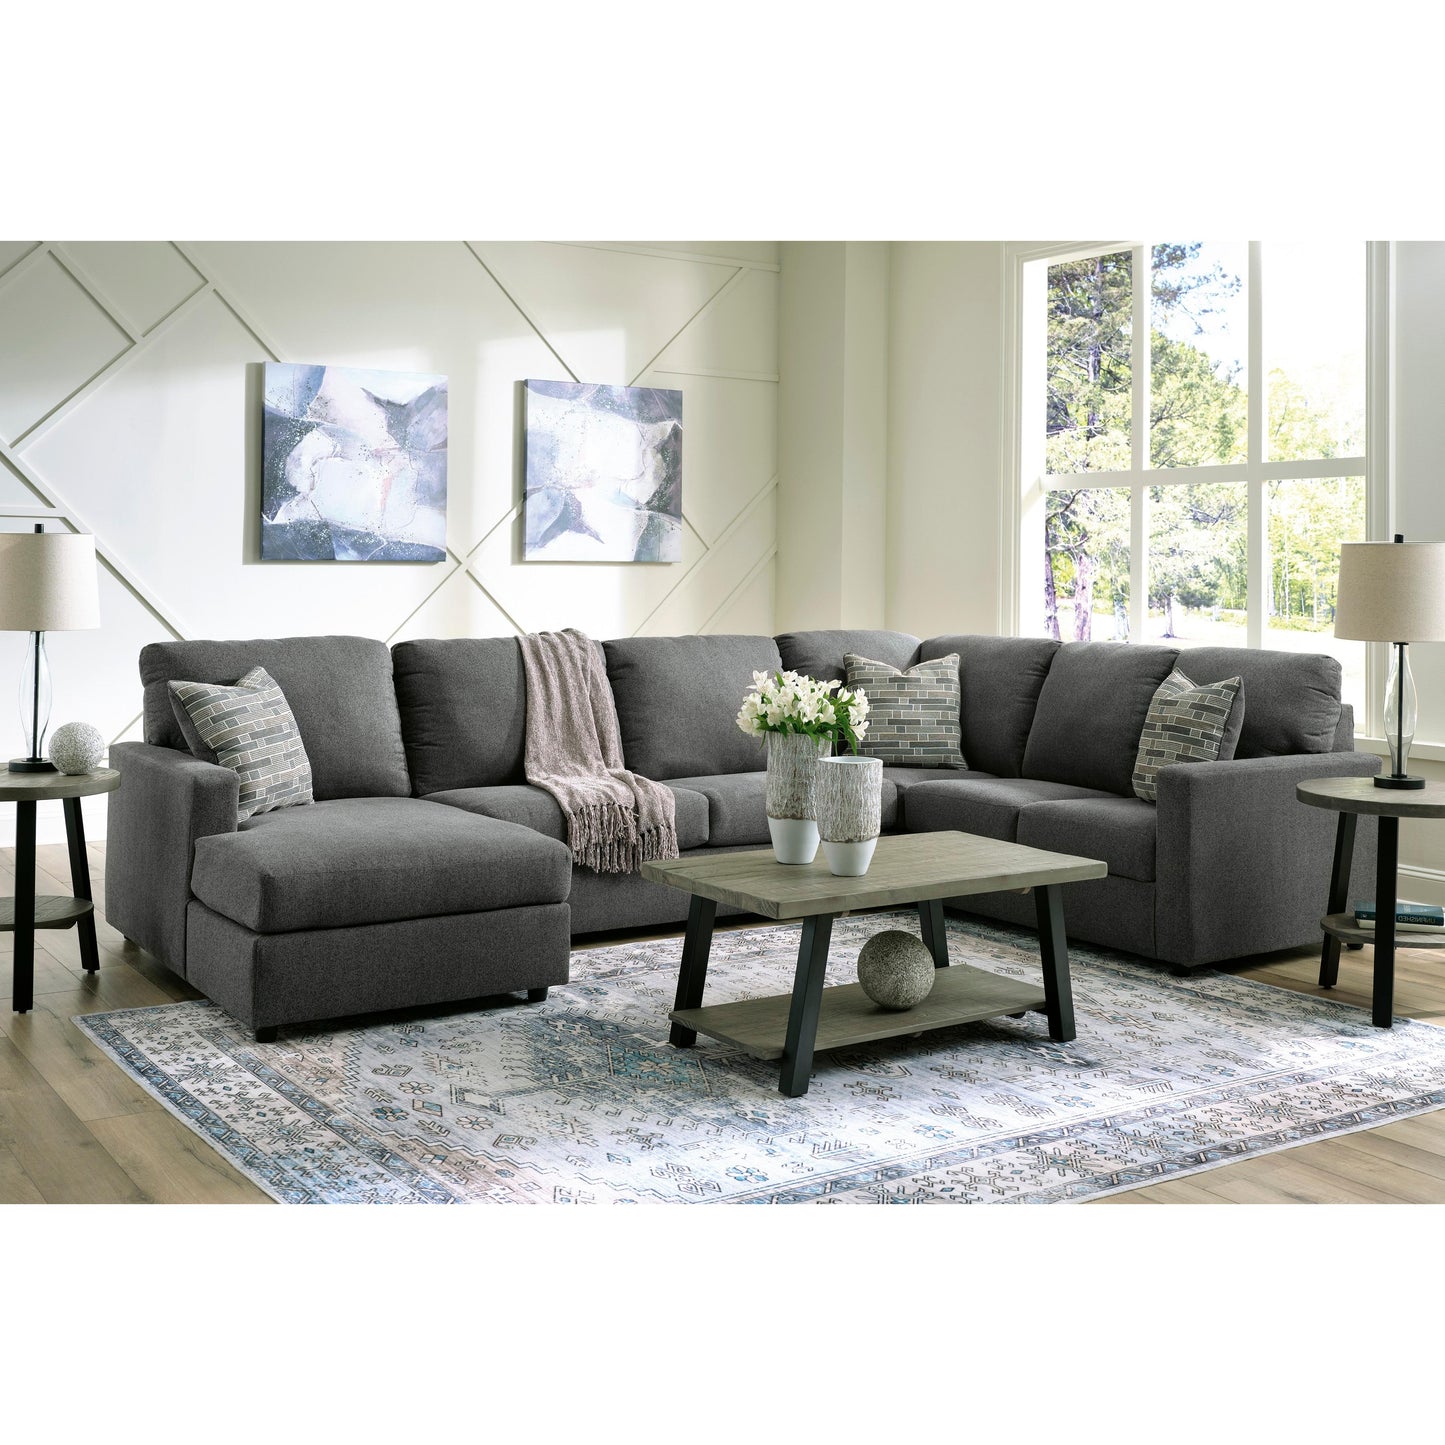 Signature Design by Ashley Edenfield Fabric 3 pc Sectional 2900316/2900334/2900349 IMAGE 4